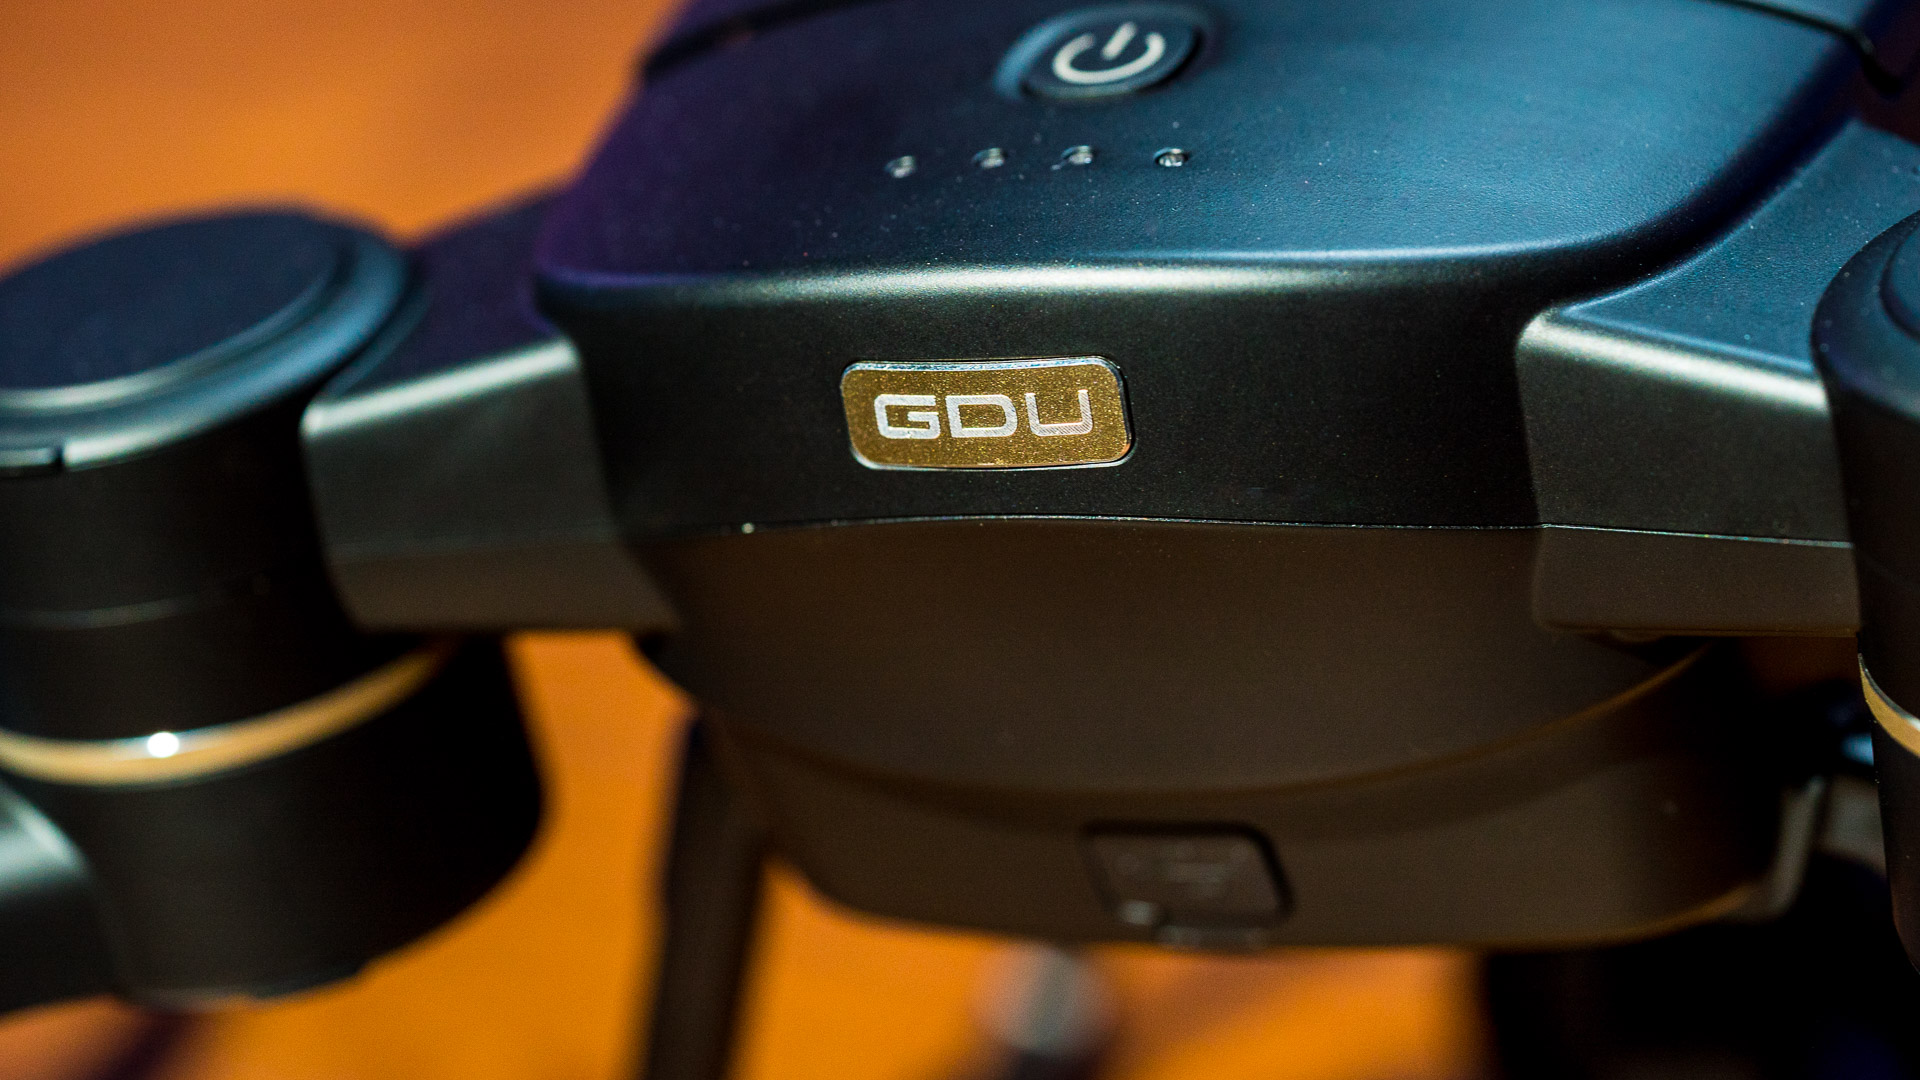 GDU makes a compelling product with the Byrd Premium 2.0 as a premium photography drone